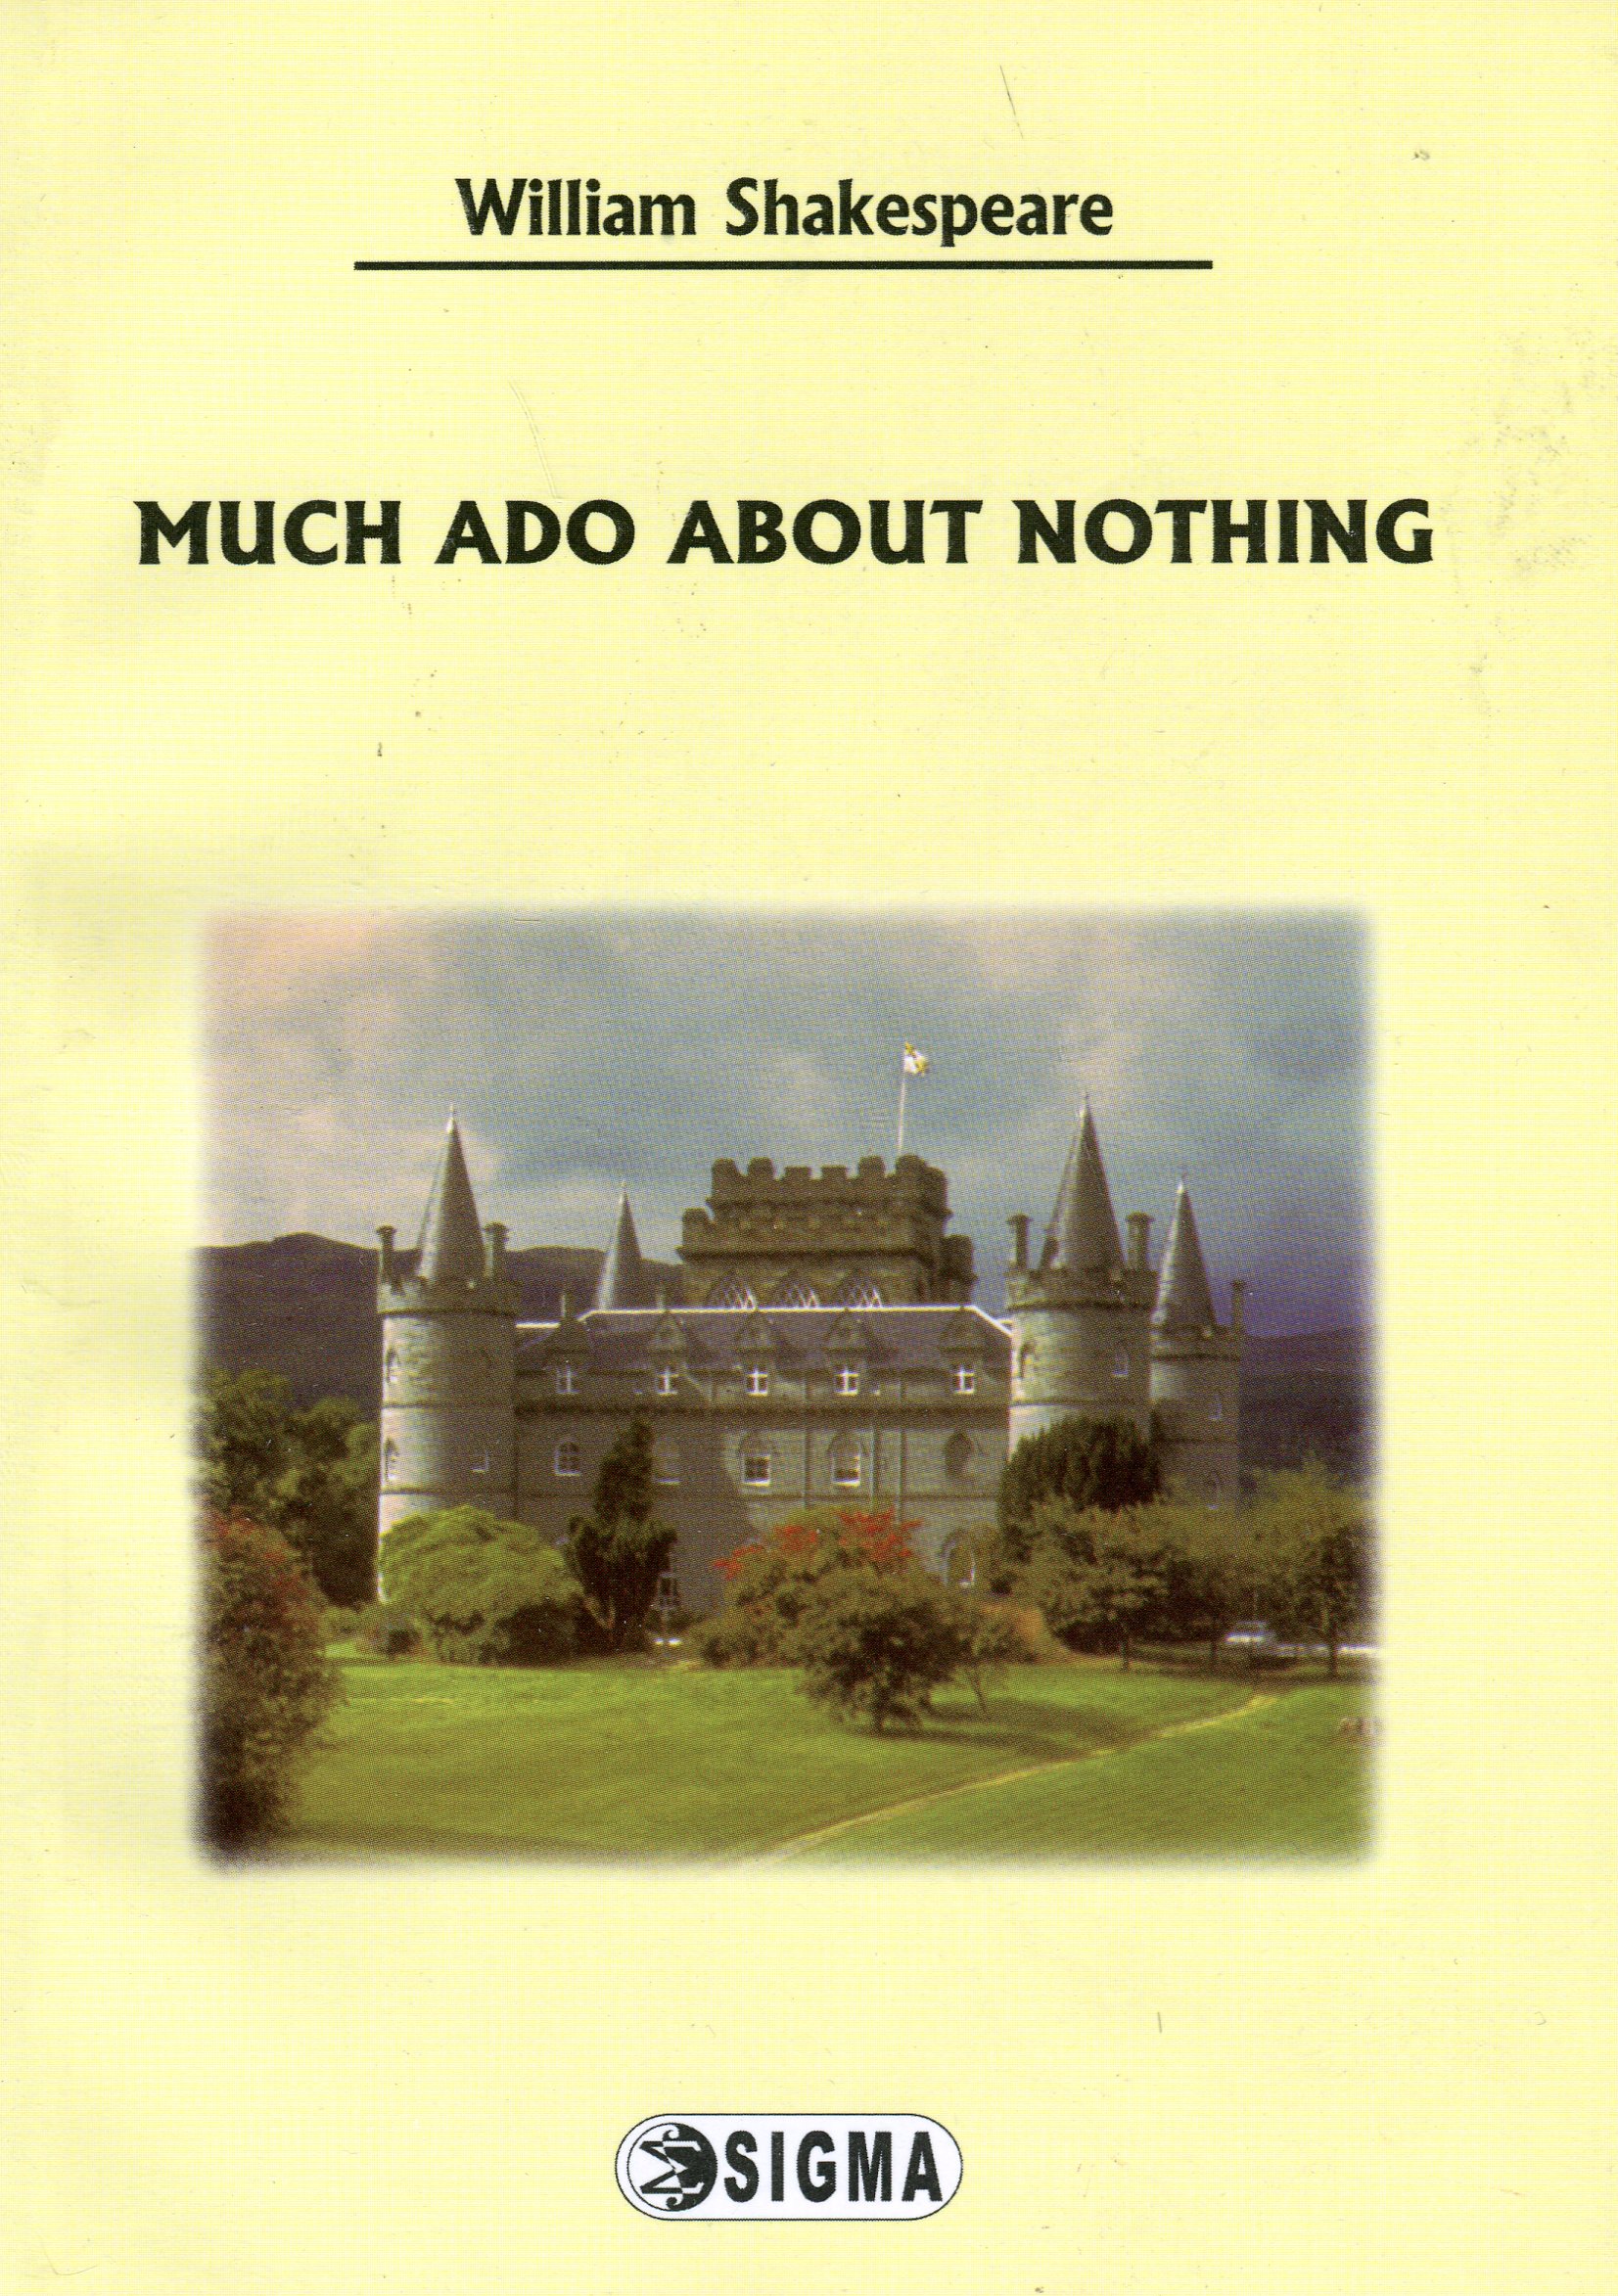 Much ado about nothing - Engleza - William Shakespeare